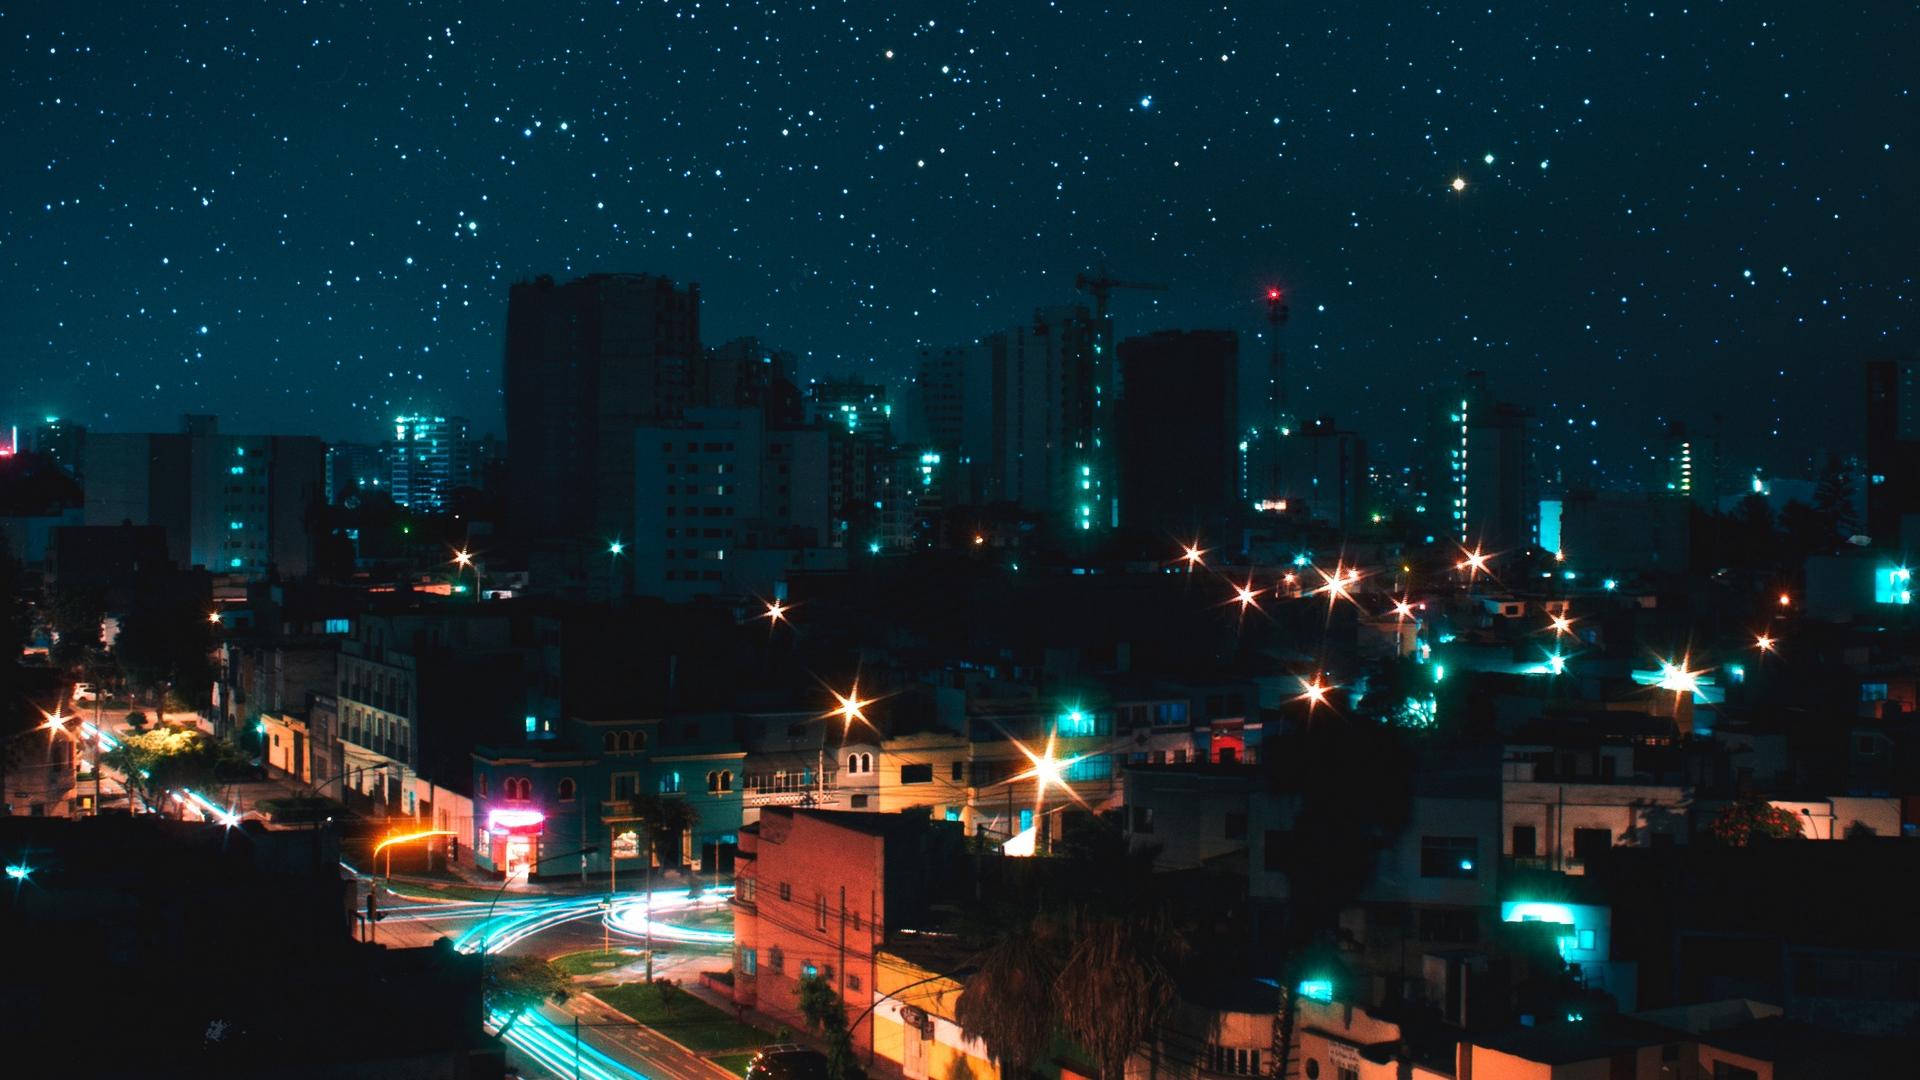 Download wallpaper 1920x1080 night city, view from above, starry sky